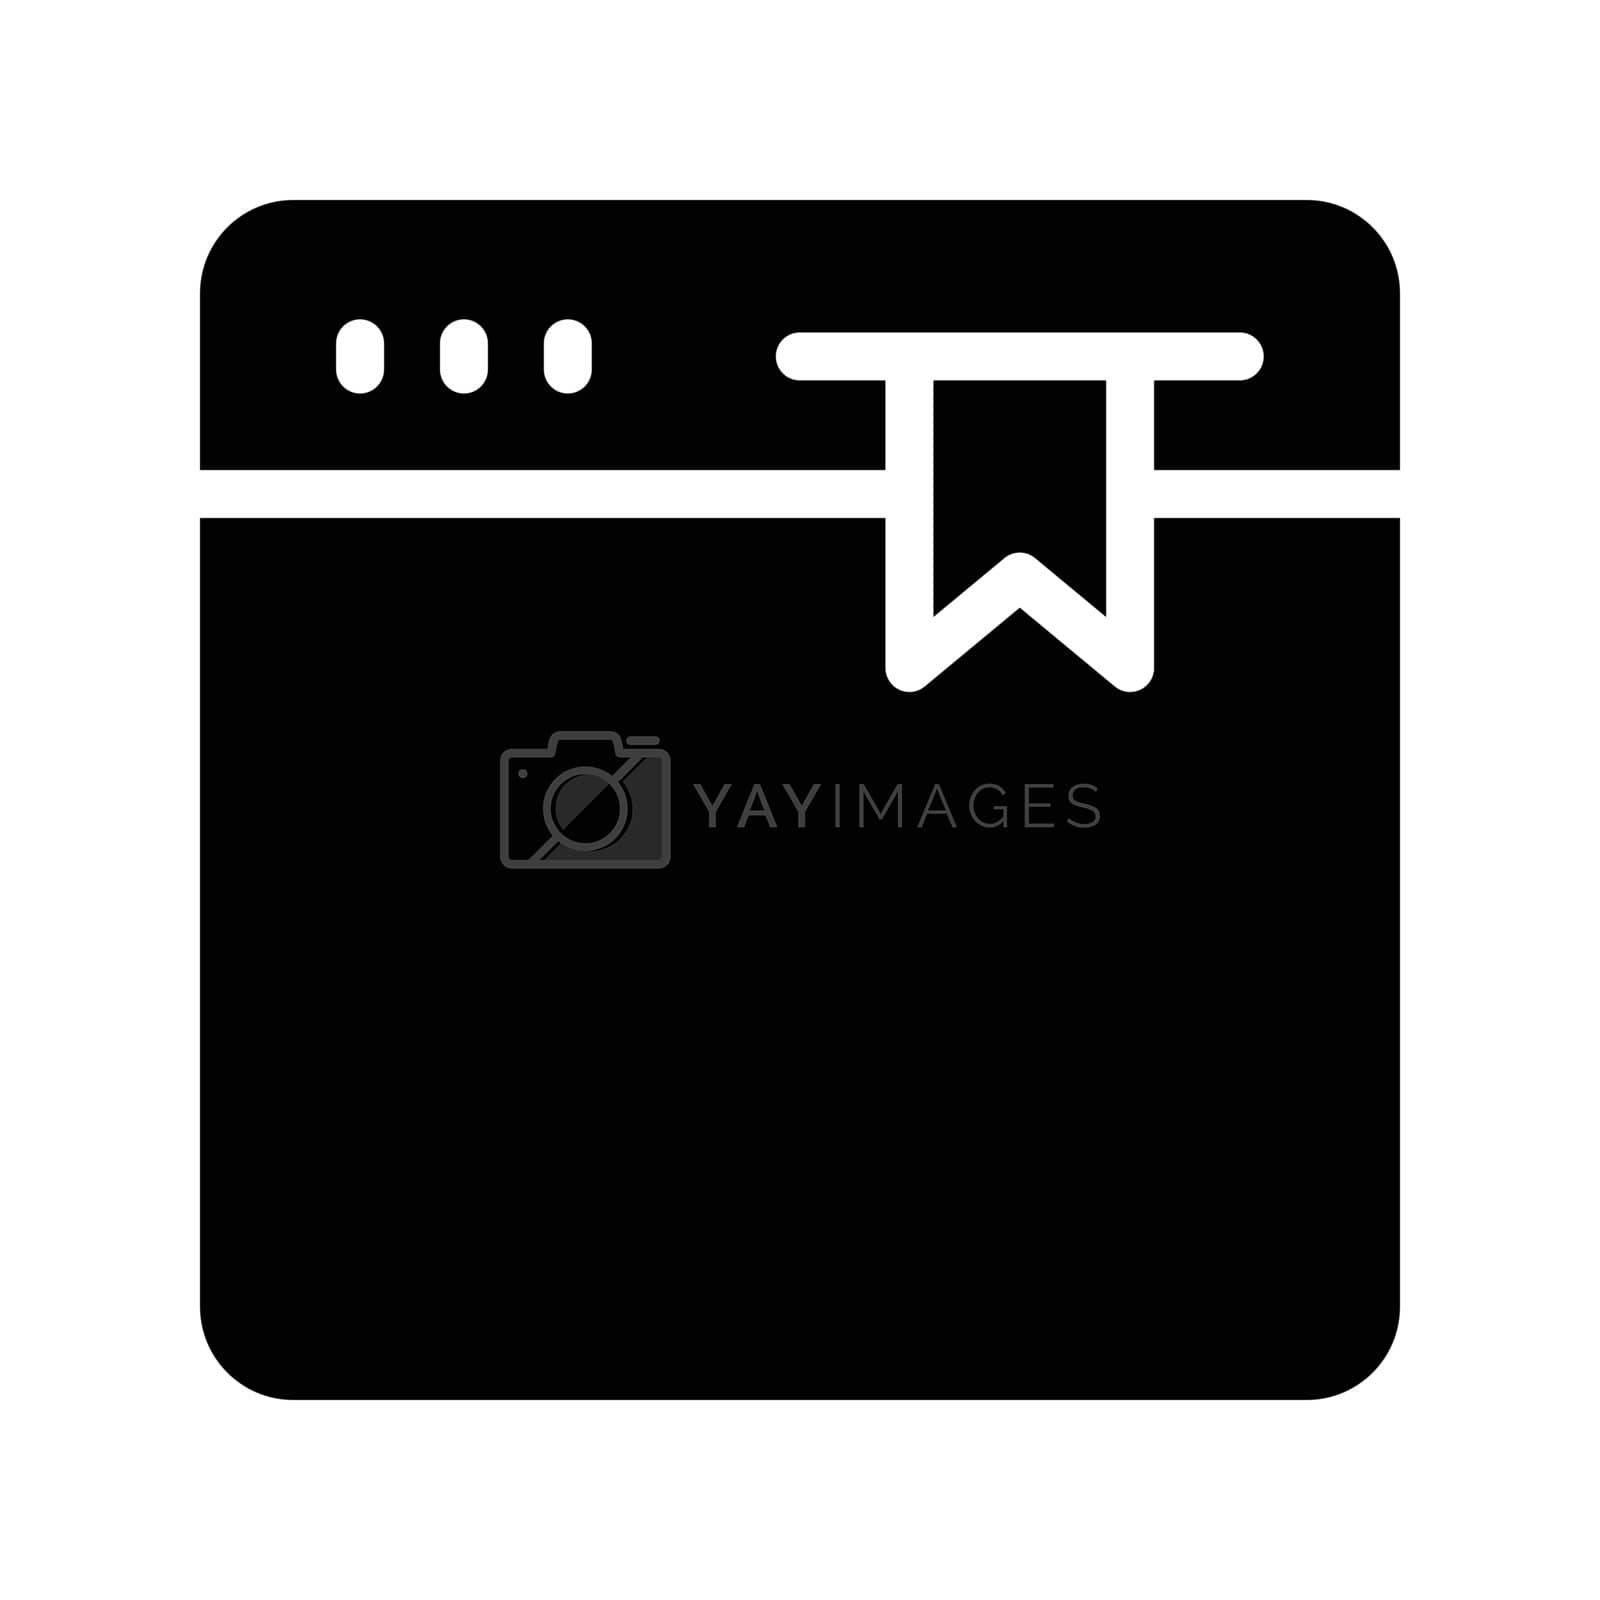 Royalty free image of bookmark by vectorstall